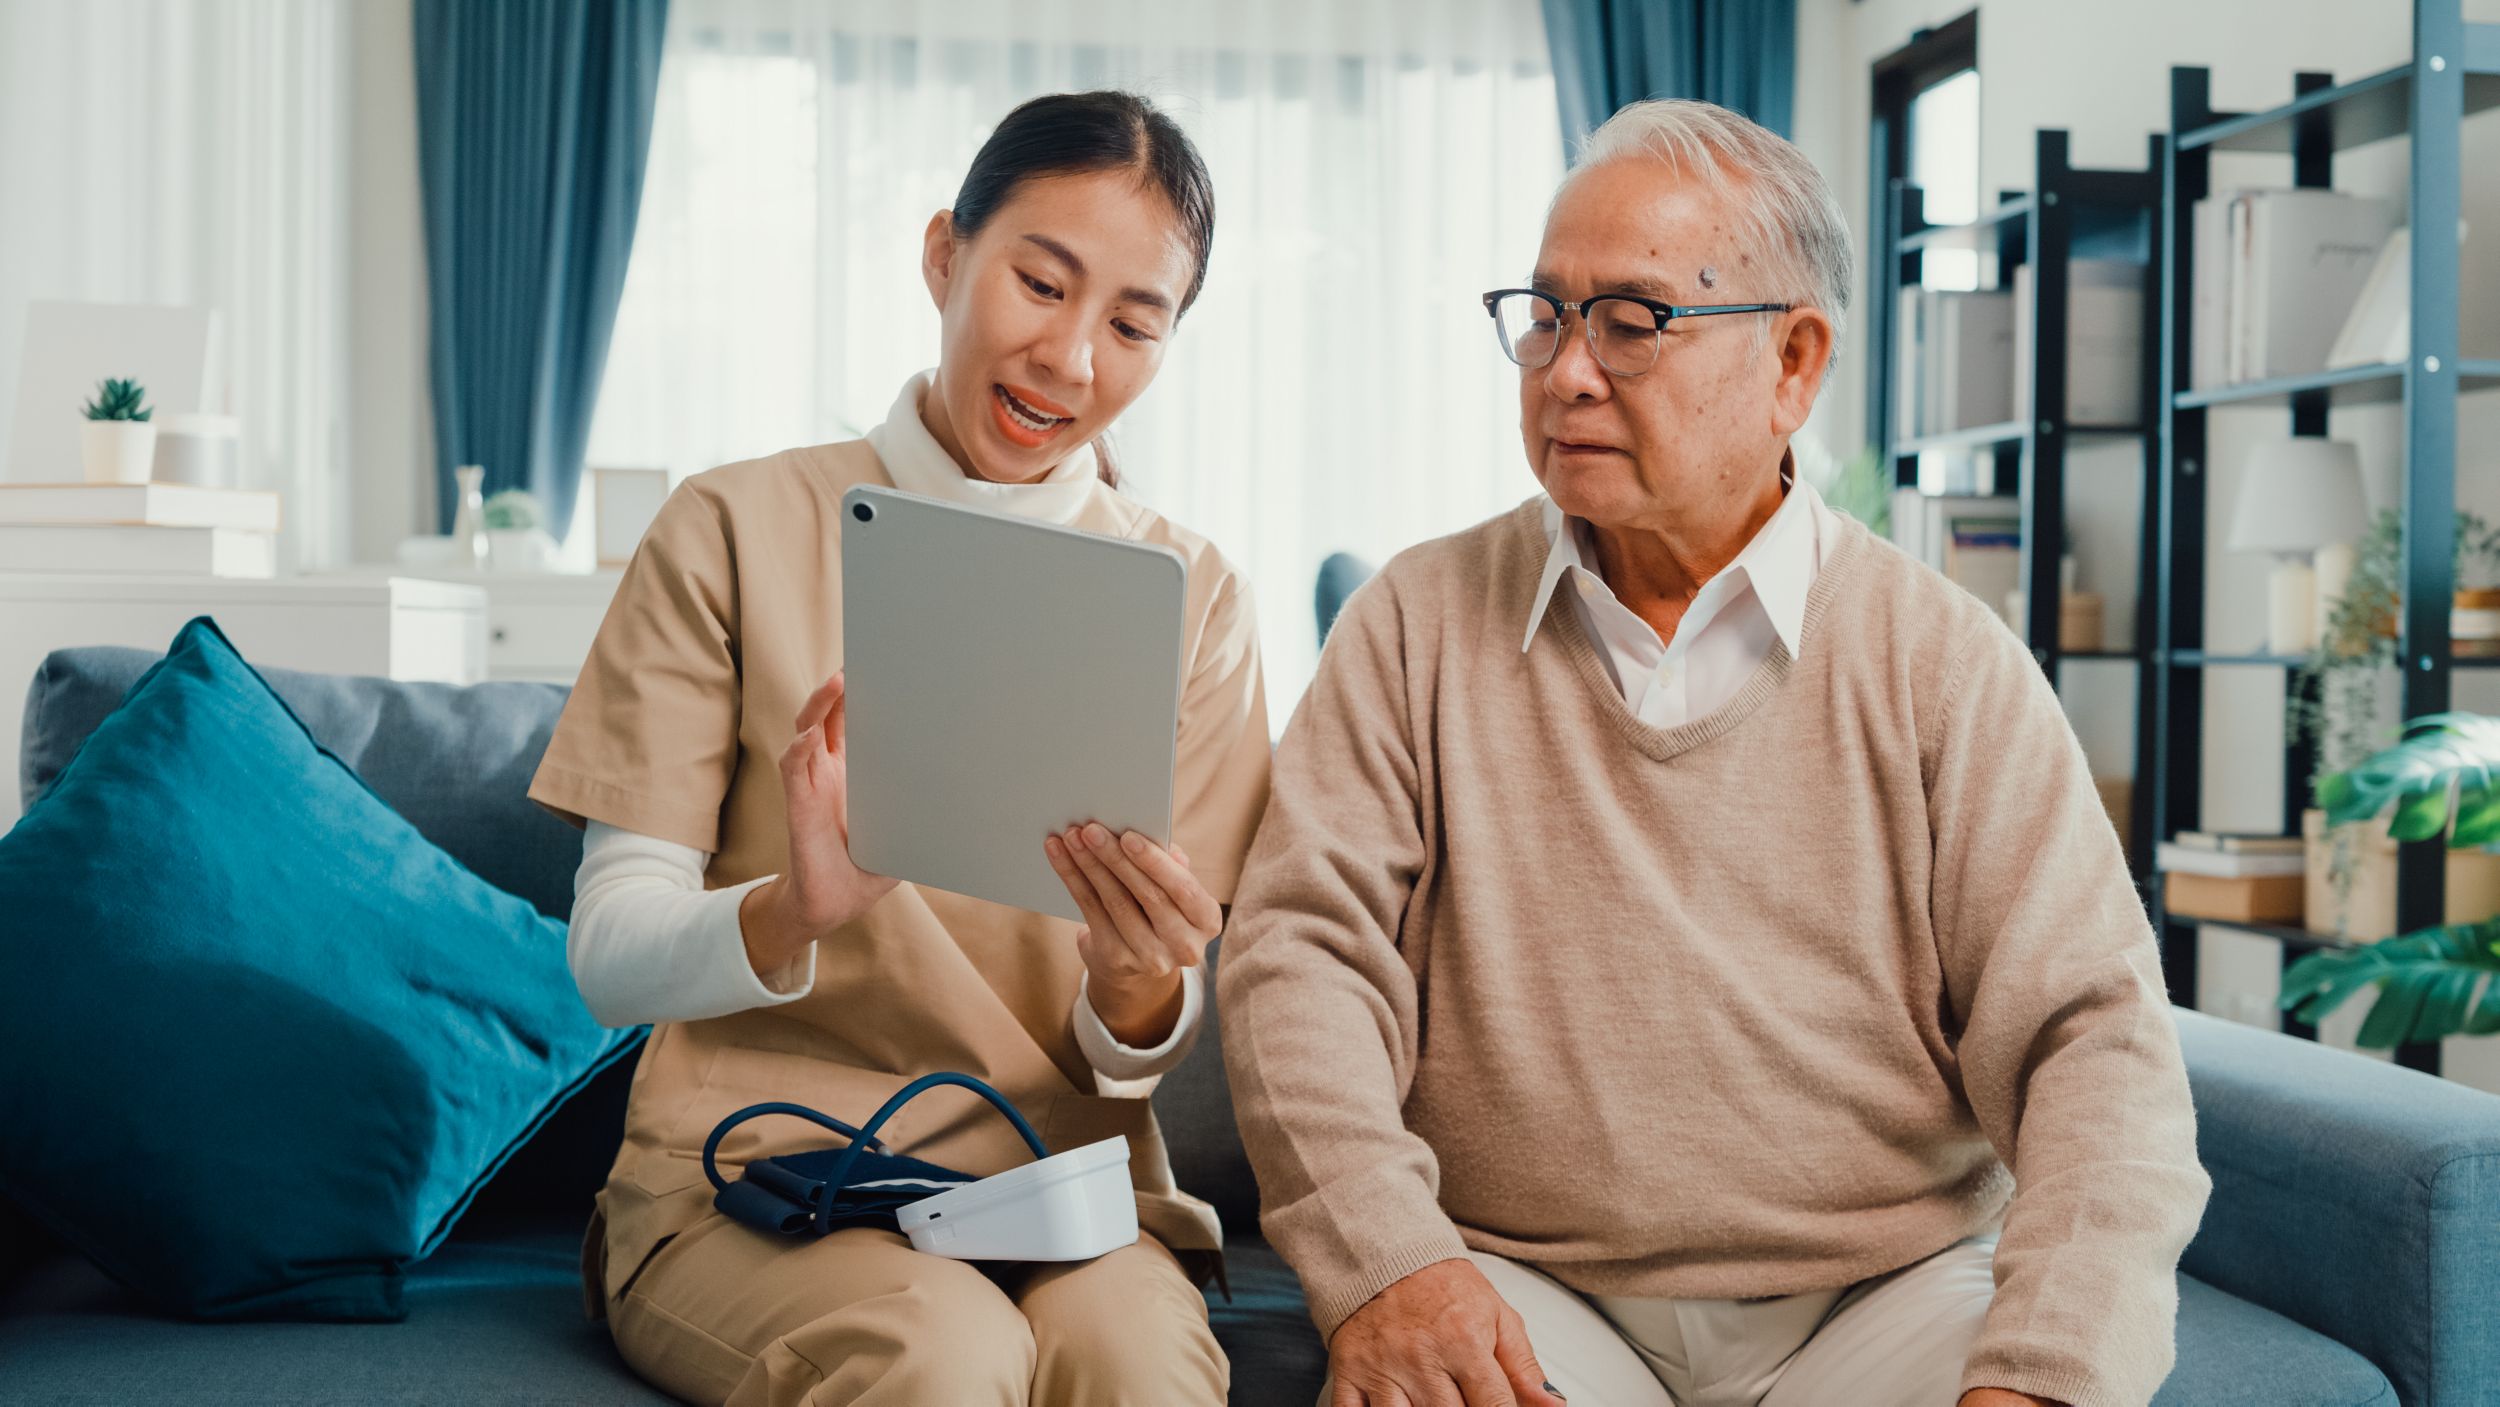 Young Asian female professional caregiver helps older Asian man use digital tablet on couch at home.